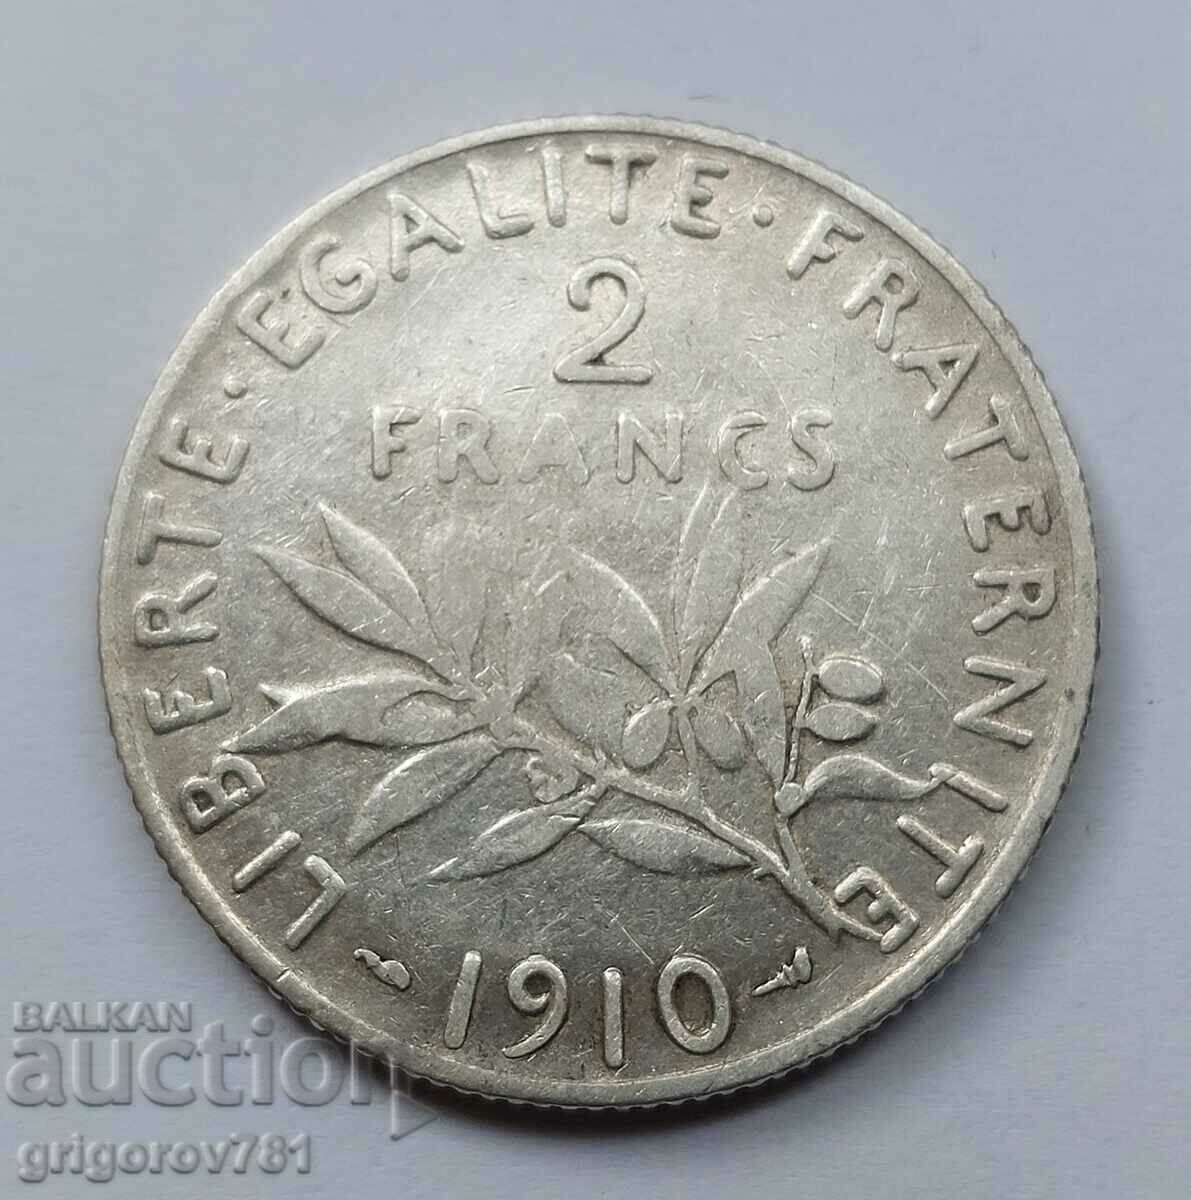 2 Francs Silver France 1910 - Silver Coin #147